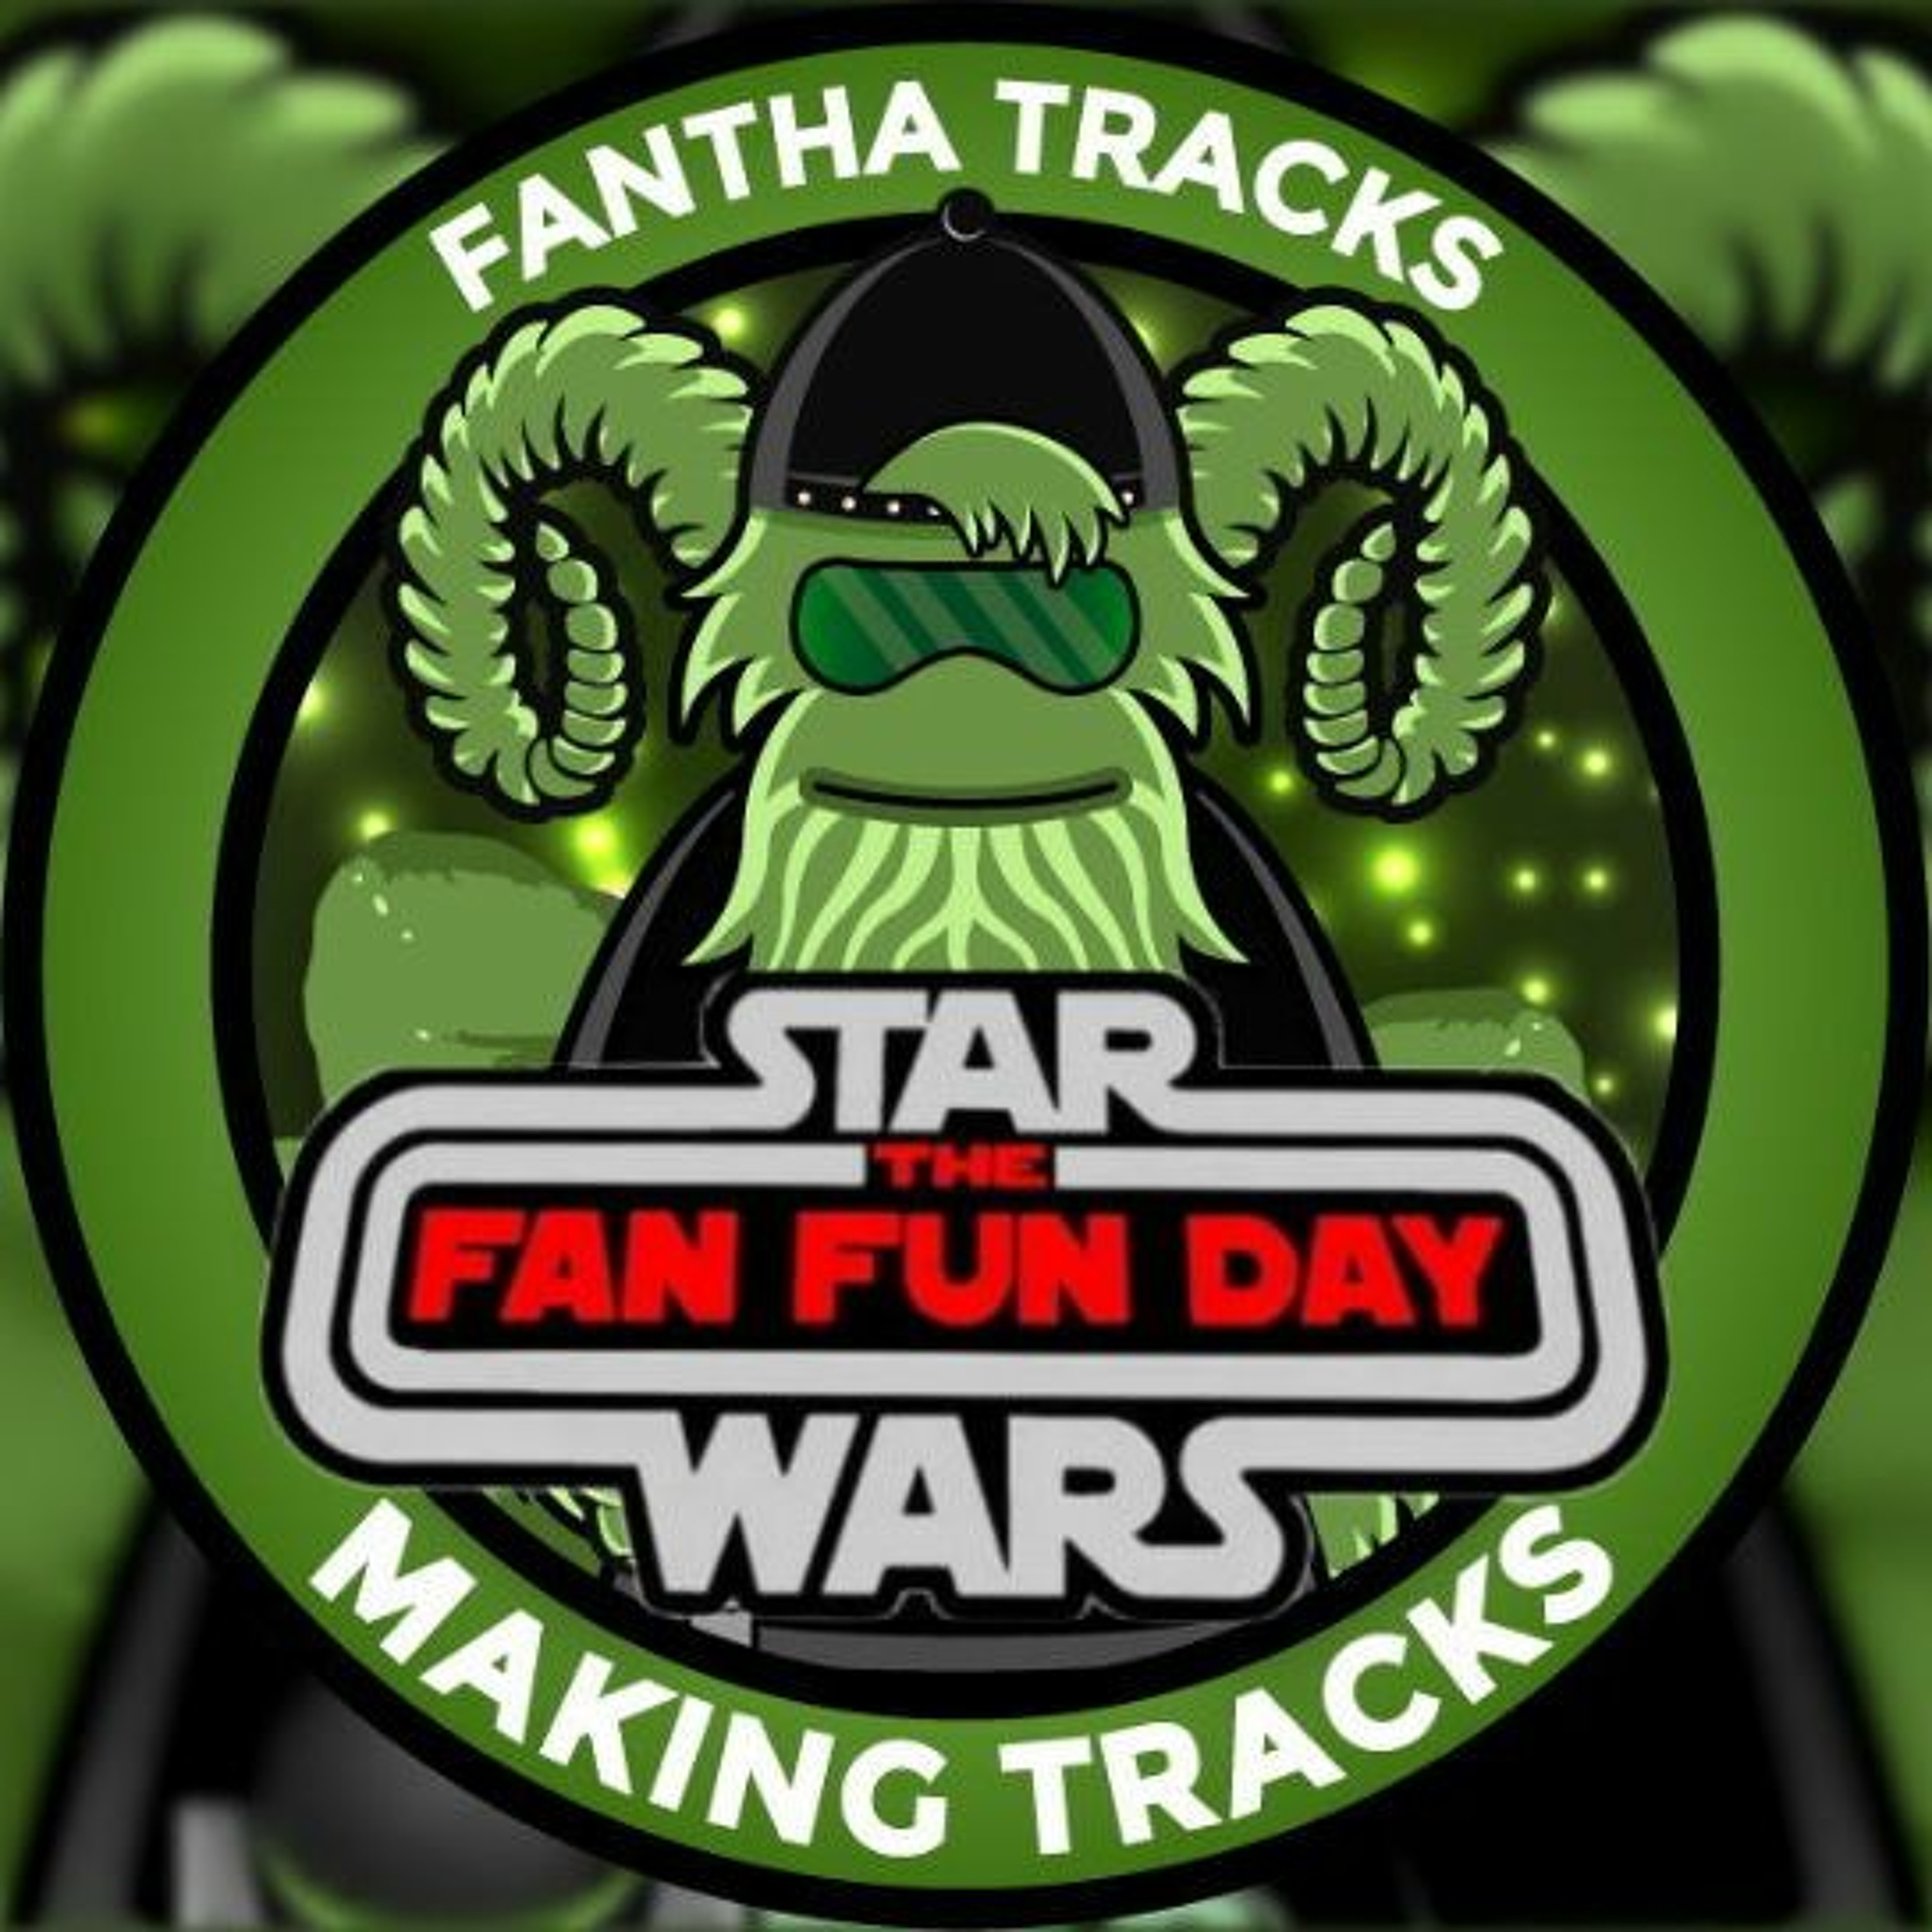 Making Tracks Episode 164: Star Wars Fan Fun Day 2023: With guests Hazel Lyth and Jonathan Cass